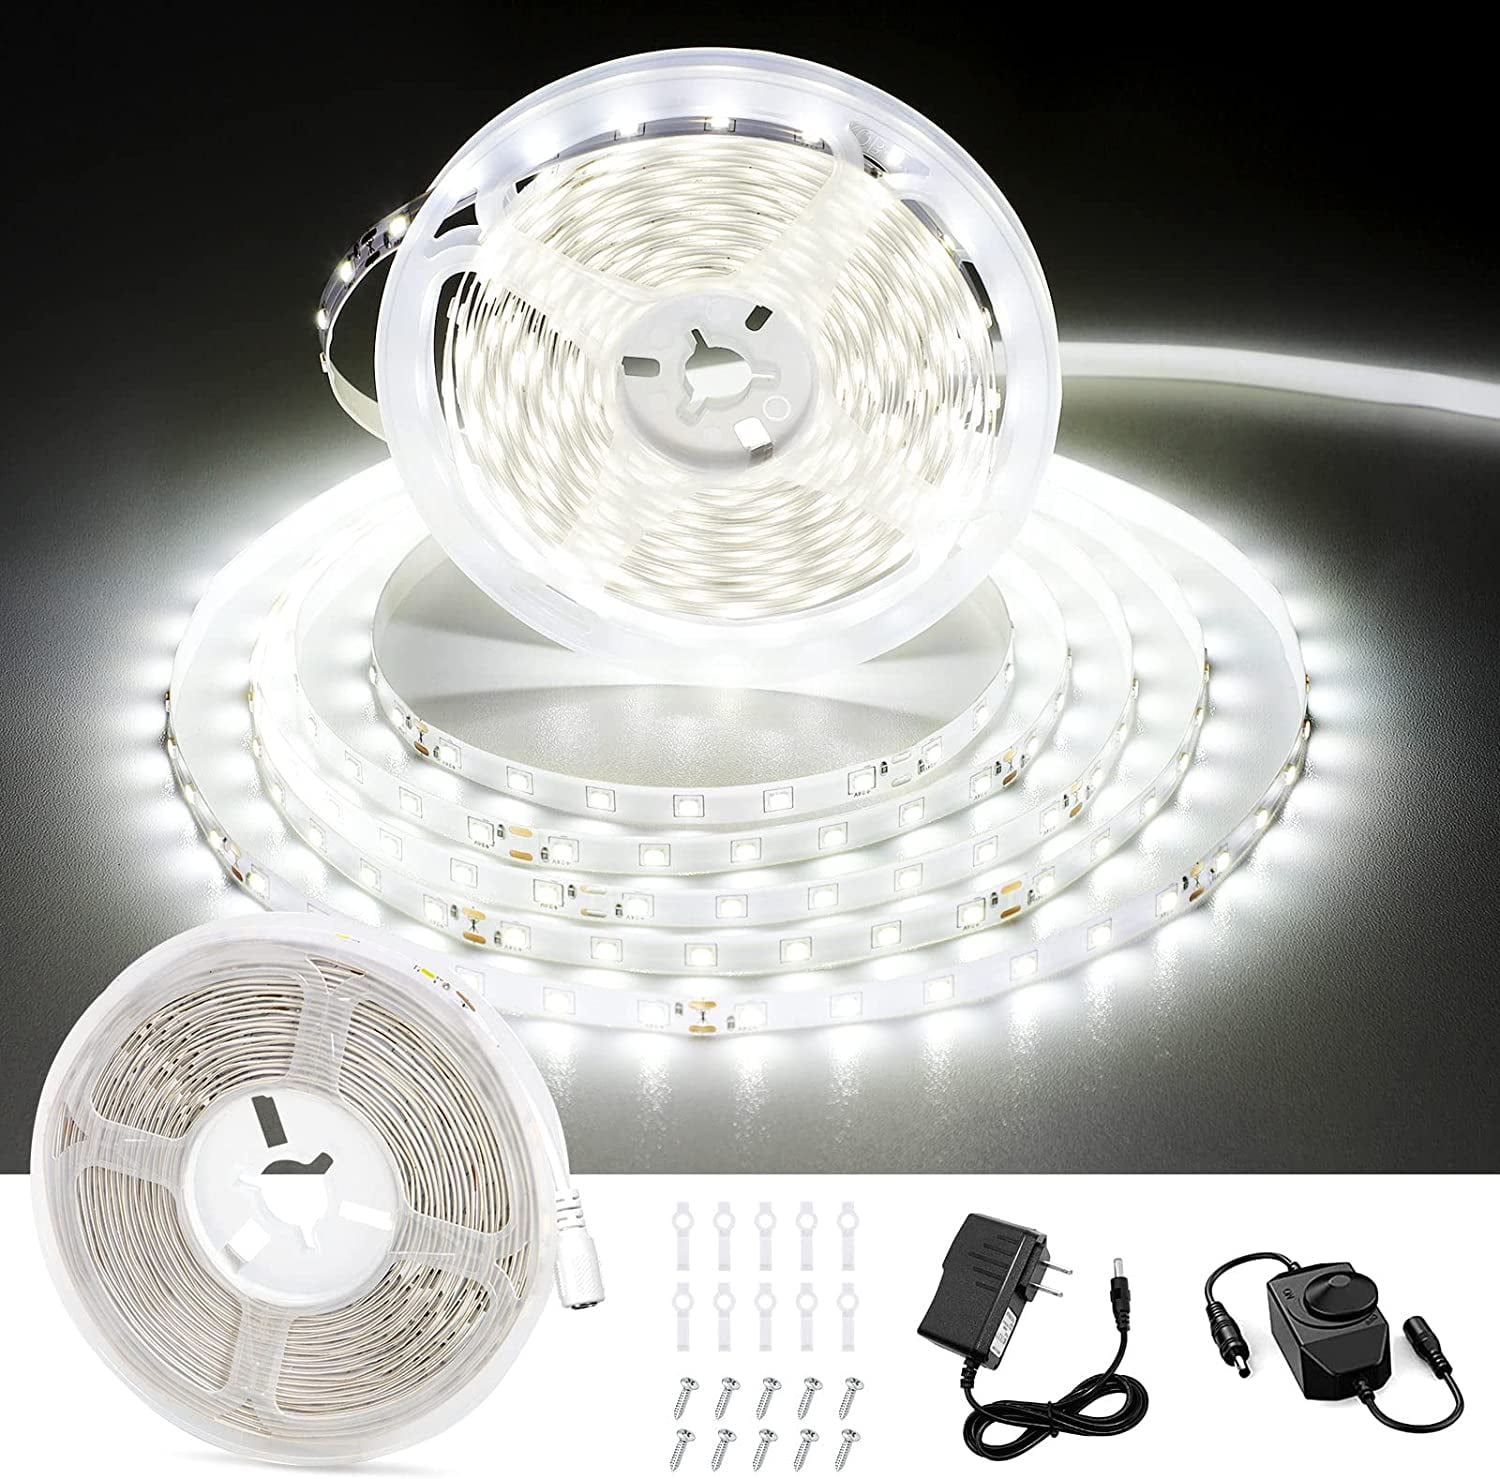  GUOTONG 6m LED Strip Lights, 3000K-6000K Tunable White, 20ft  Dimmable Bright LED Tape Lights 360 LEDs Flexible Vanity Mirror Light for  Home, Kitchen, Under Cabinet, Bedroom : Home & Kitchen